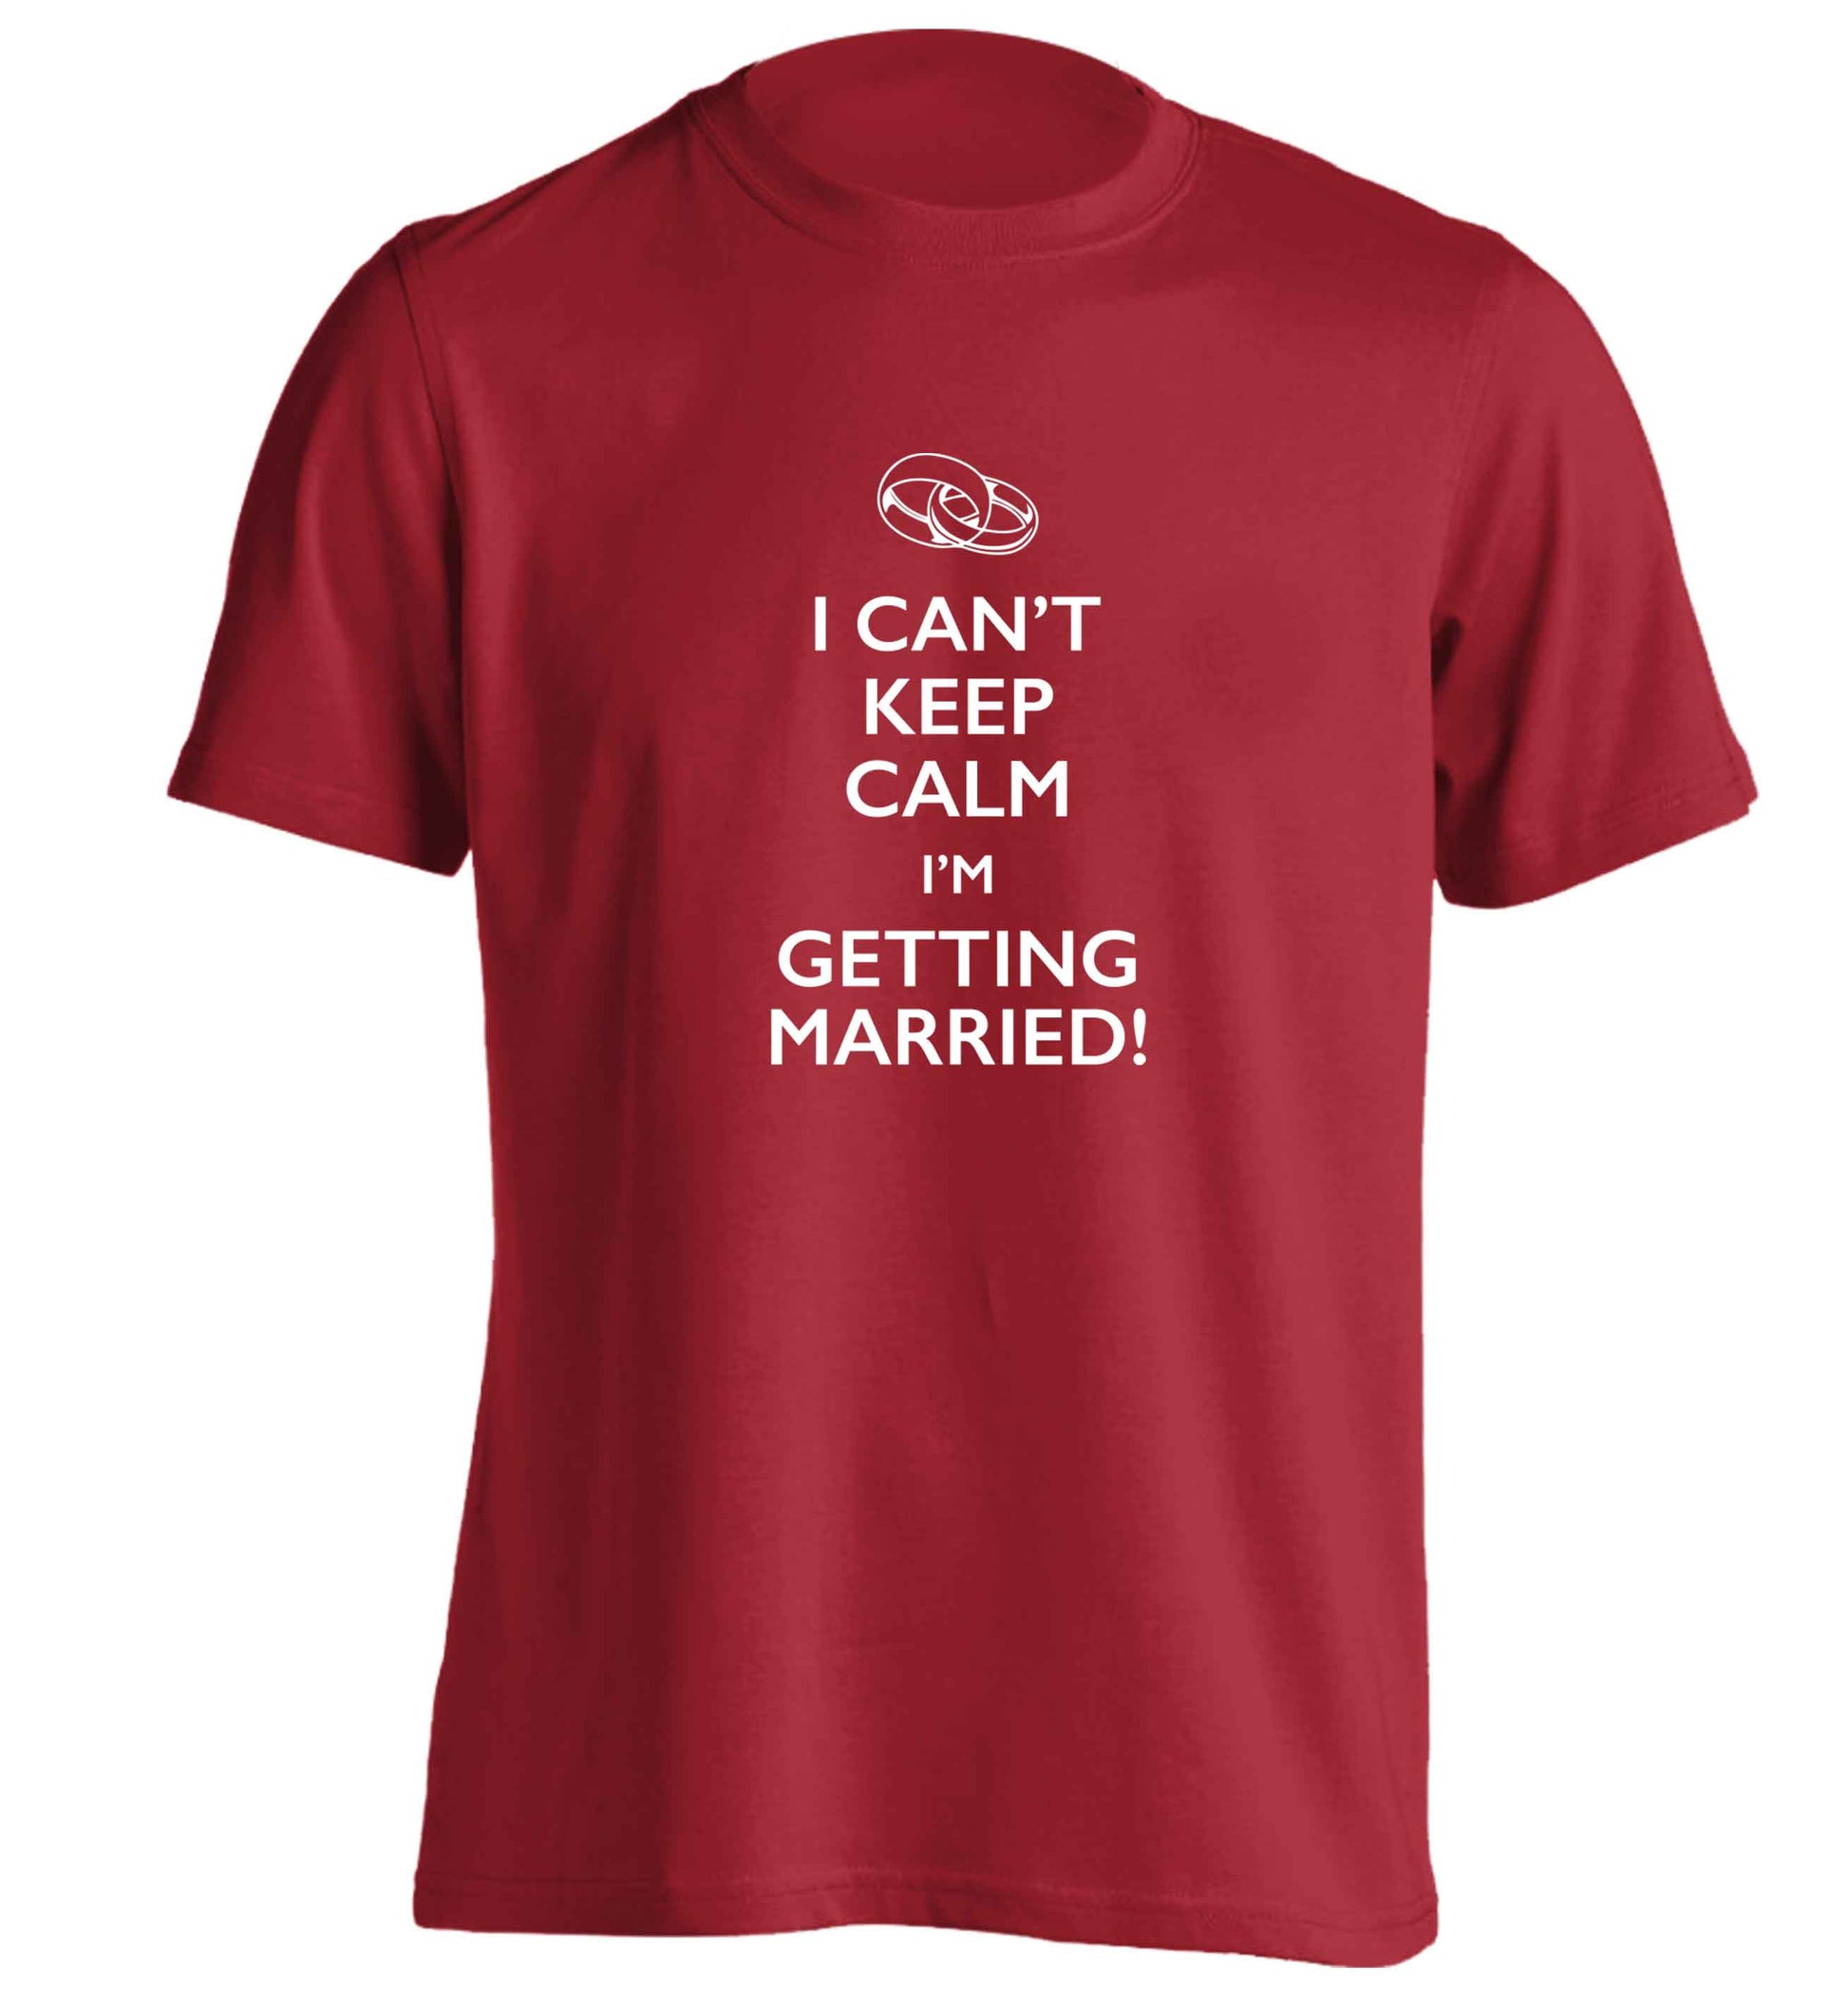 I can't keep calm I'm getting married! adults unisex red Tshirt 2XL